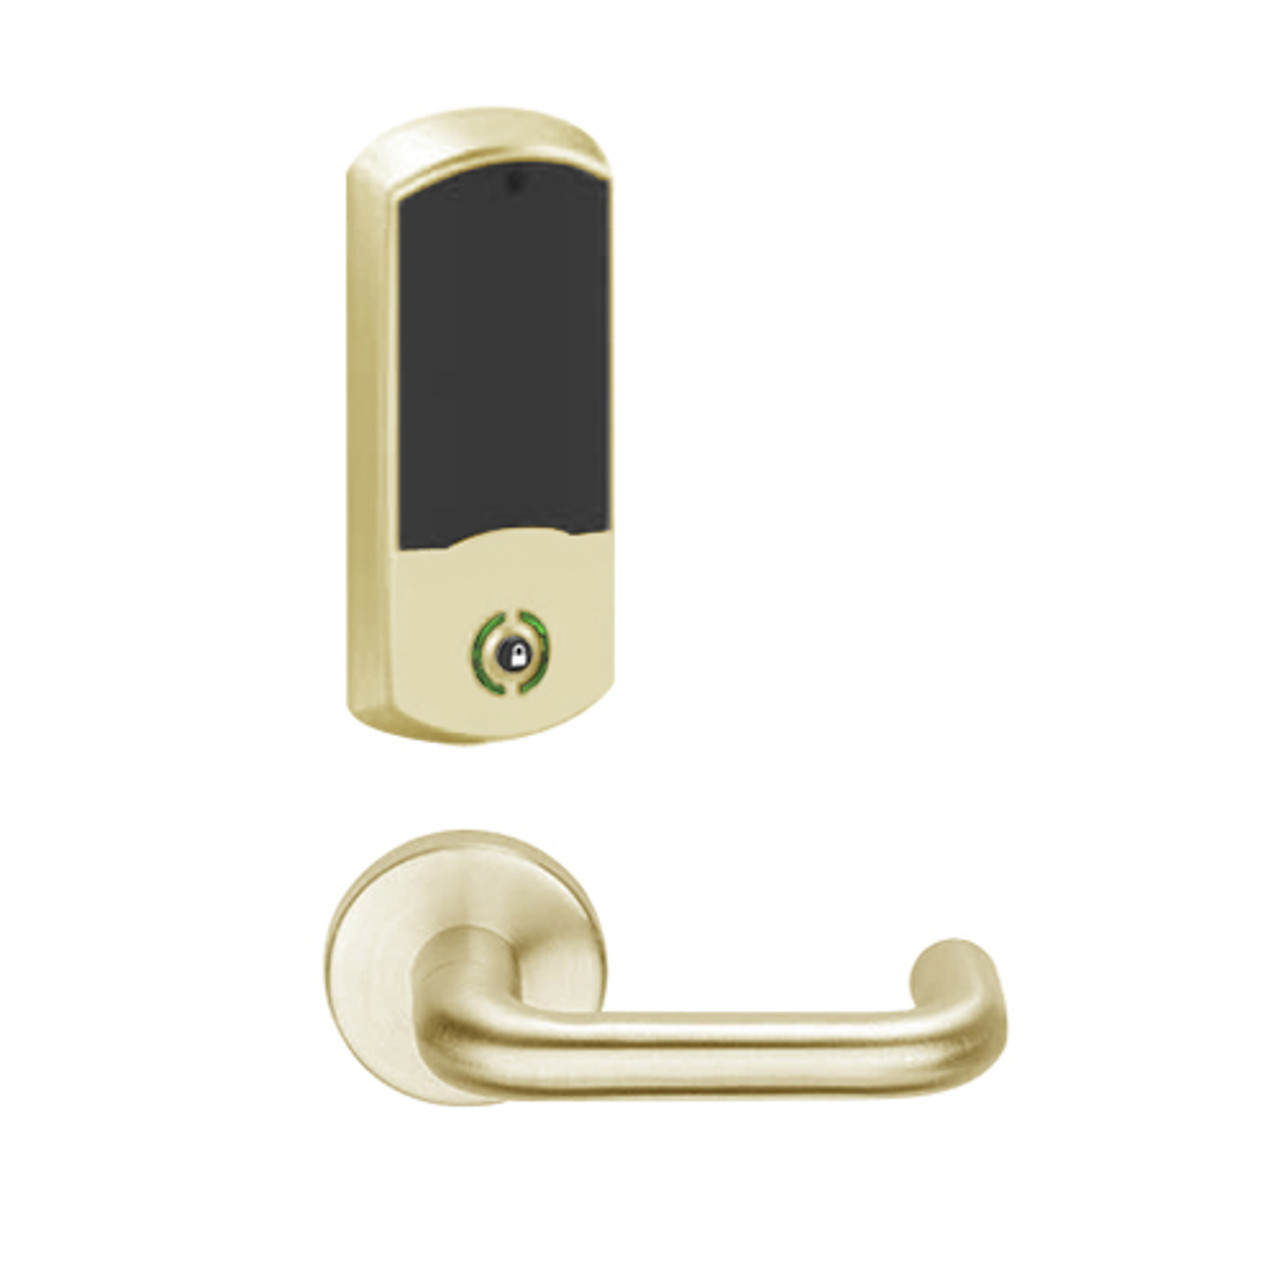 LEMB-GRW-P-03-606-00A Schlage Privacy/Office Wireless Greenwich Mortise Lock with Push Button & LED Indicator and Tubular Lever in Satin Brass